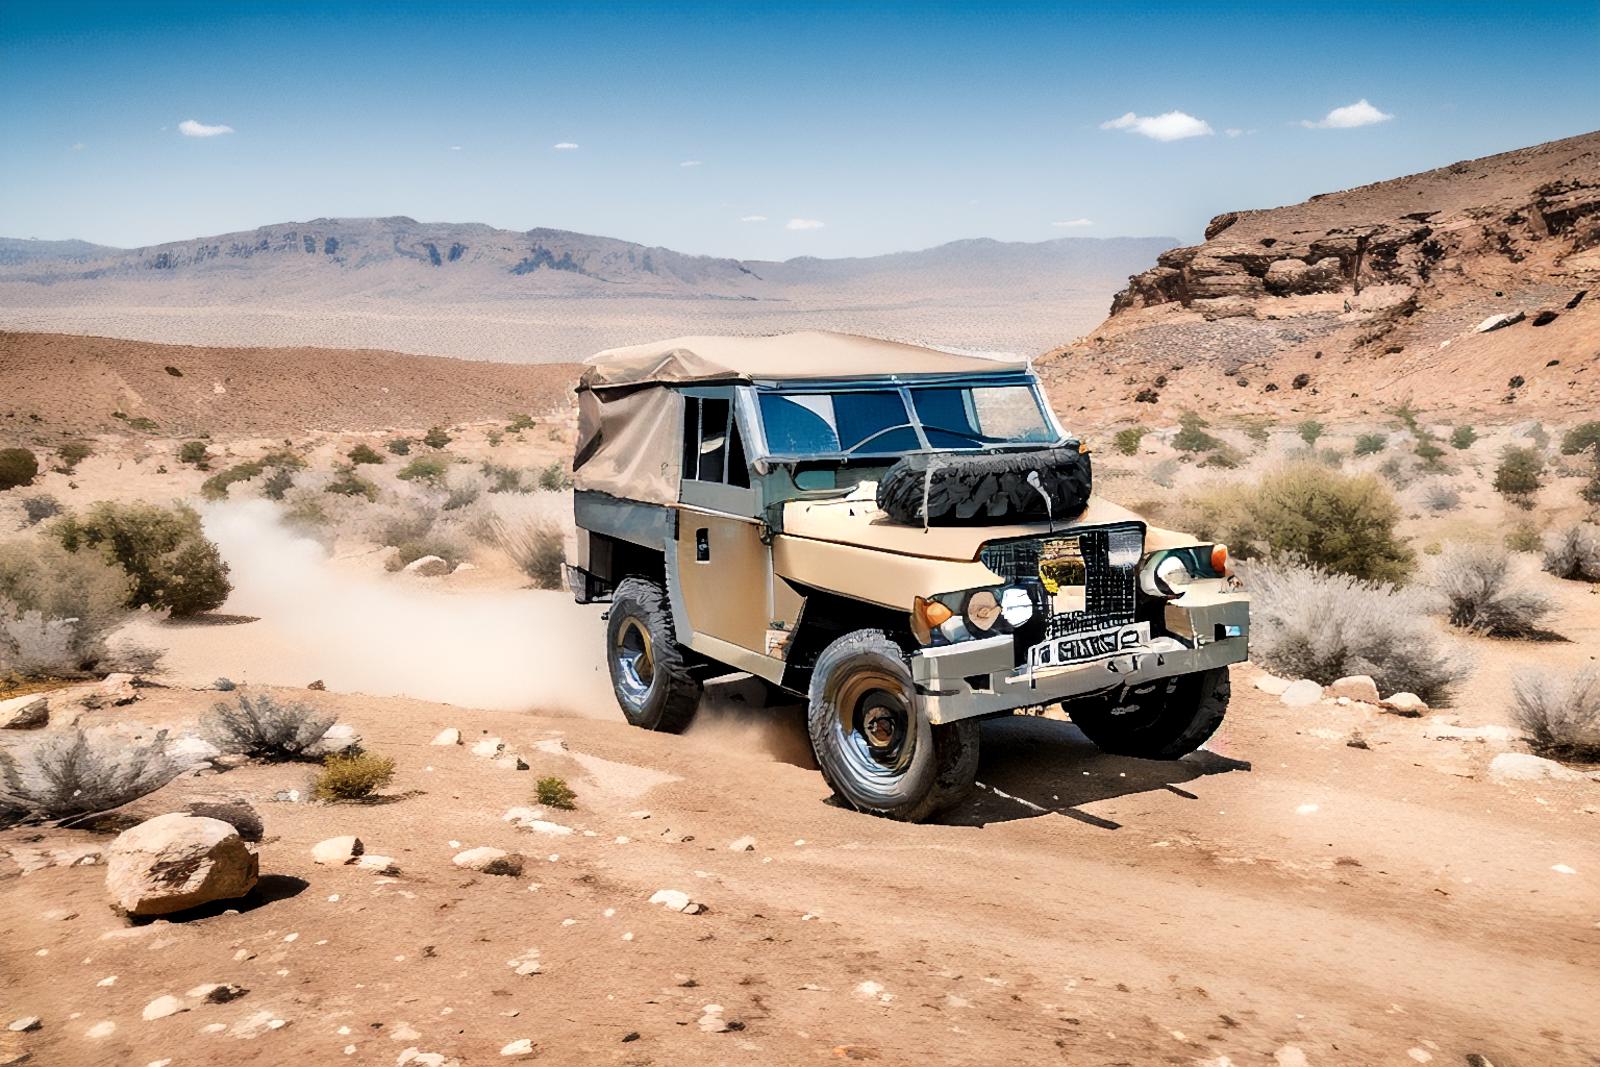 Land Rover Lightweight image by MajMorse